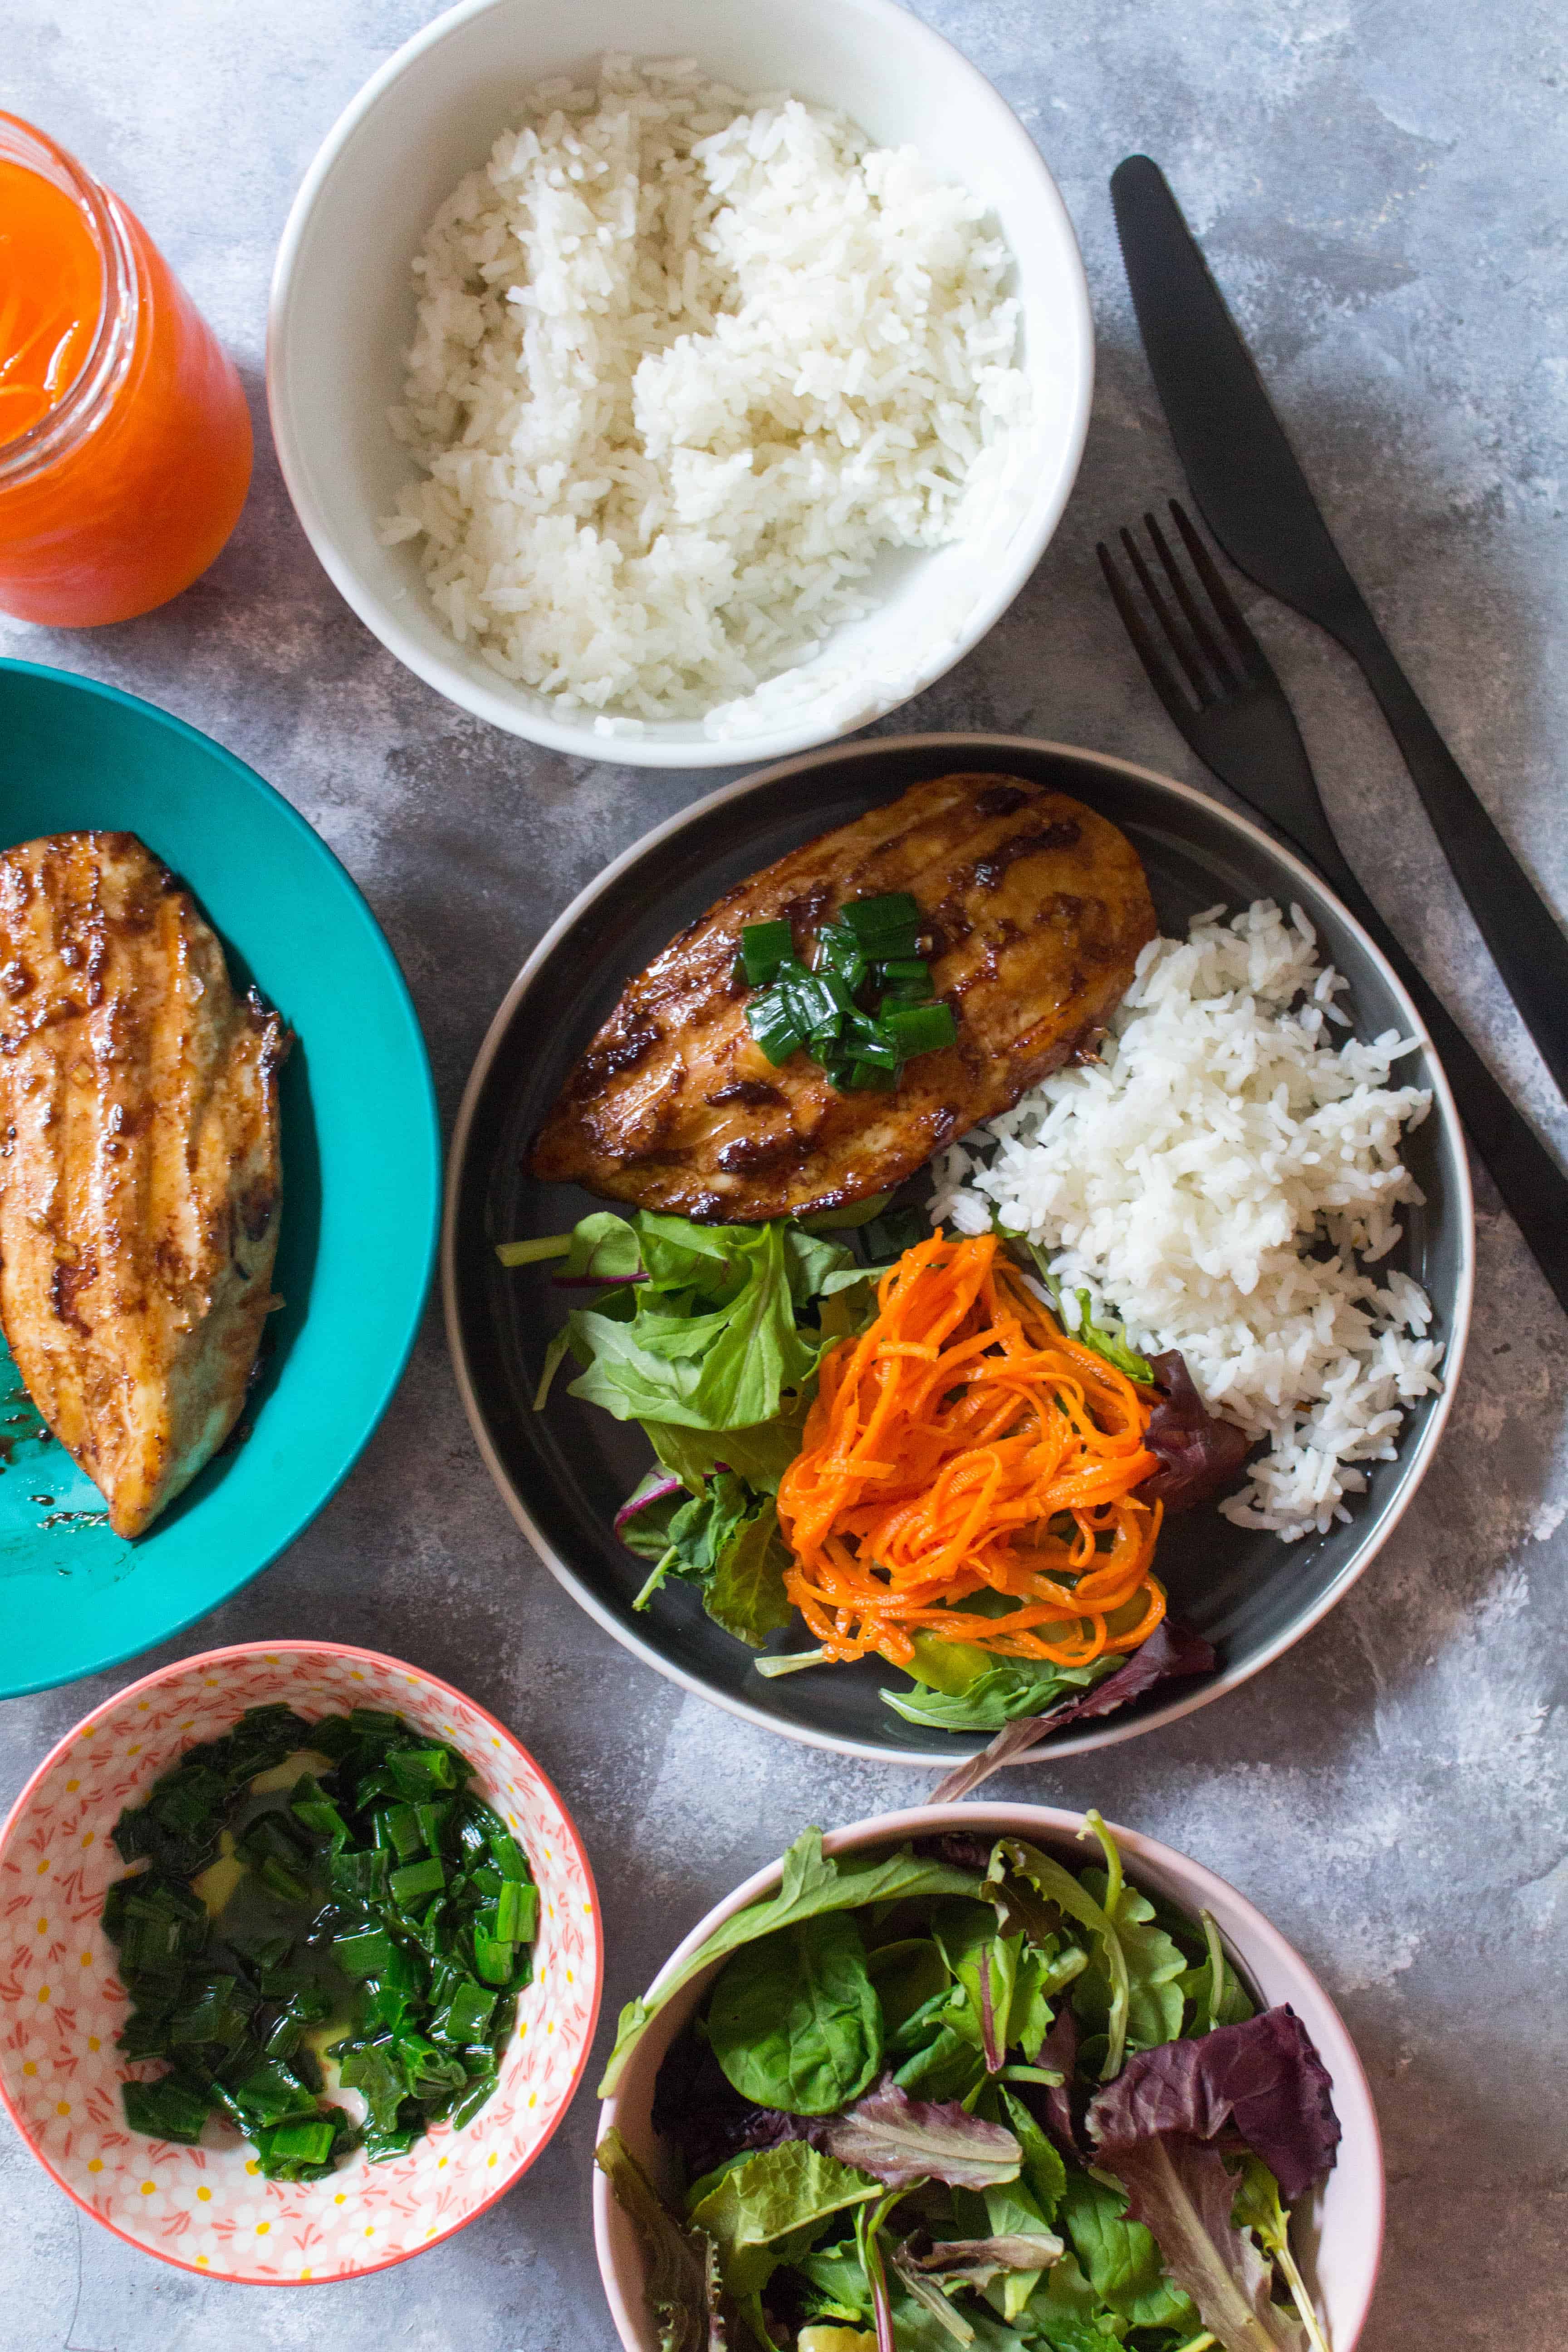 This Vietnamese Grilled Chicken Meal Prep is jammed packed with a whole lotta flavour thanks to its flavourful marinade. This Vietnamese Grilled Chicken is perfect for either a meal prep or as a weeknight dinner.